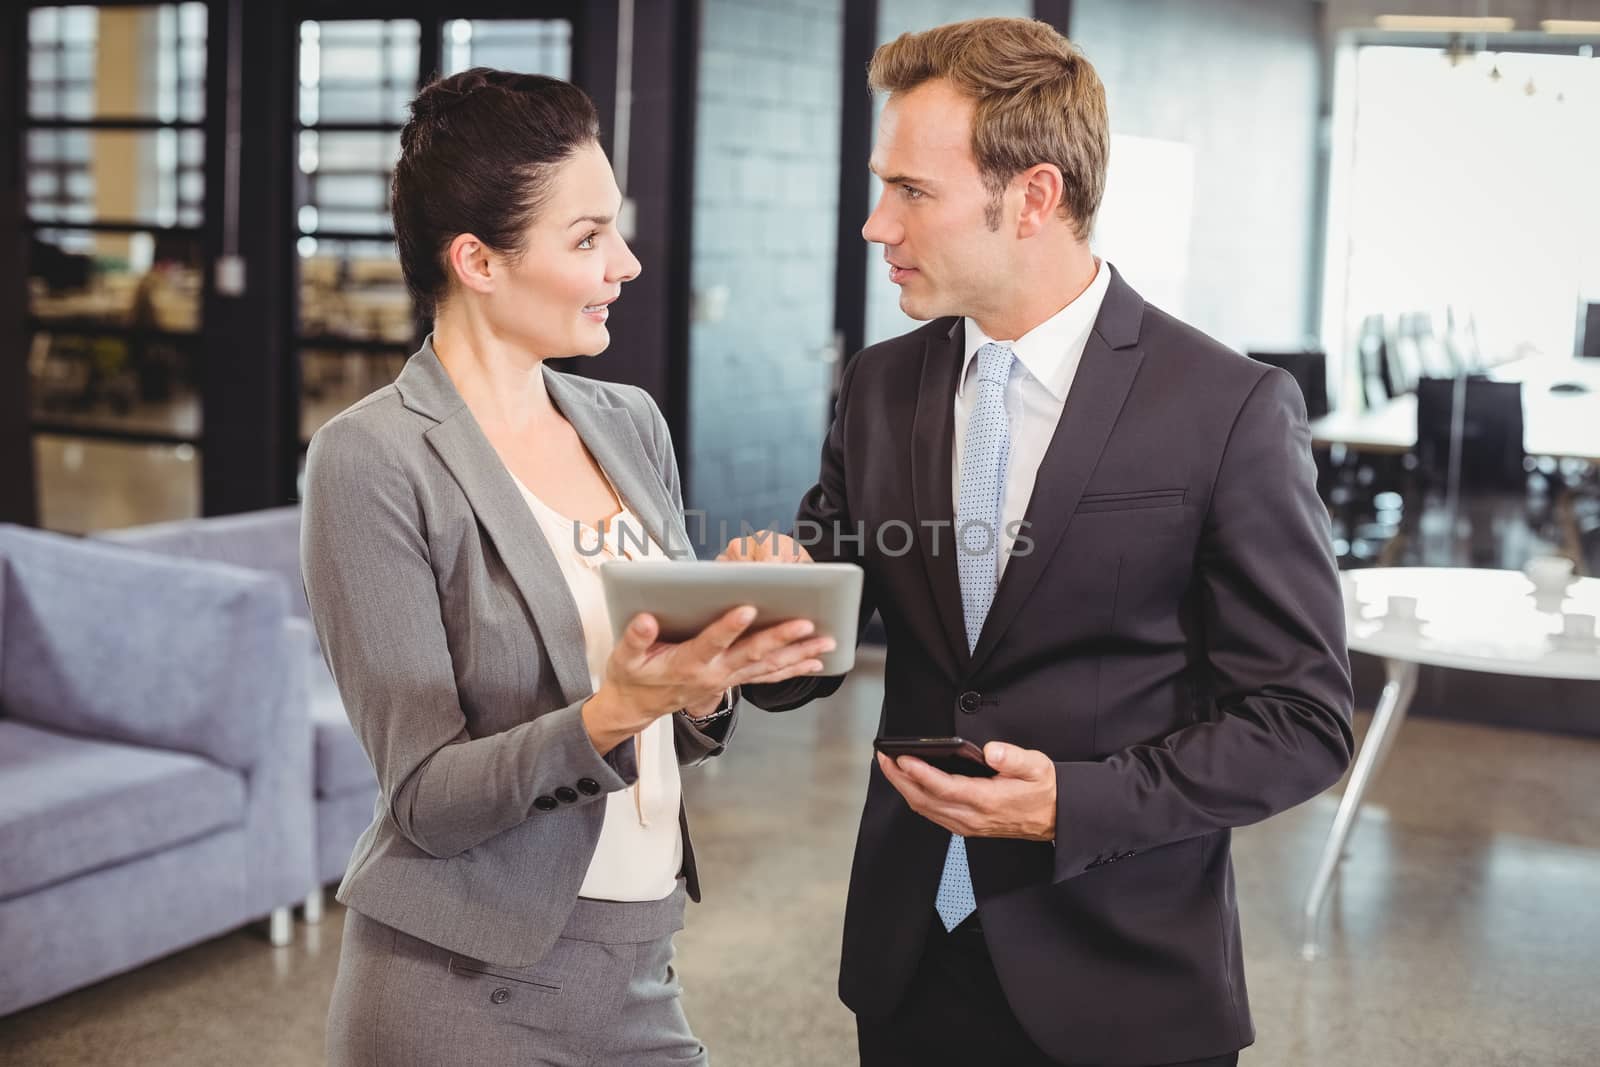 Businessman and businesswoman using digital tablet in office